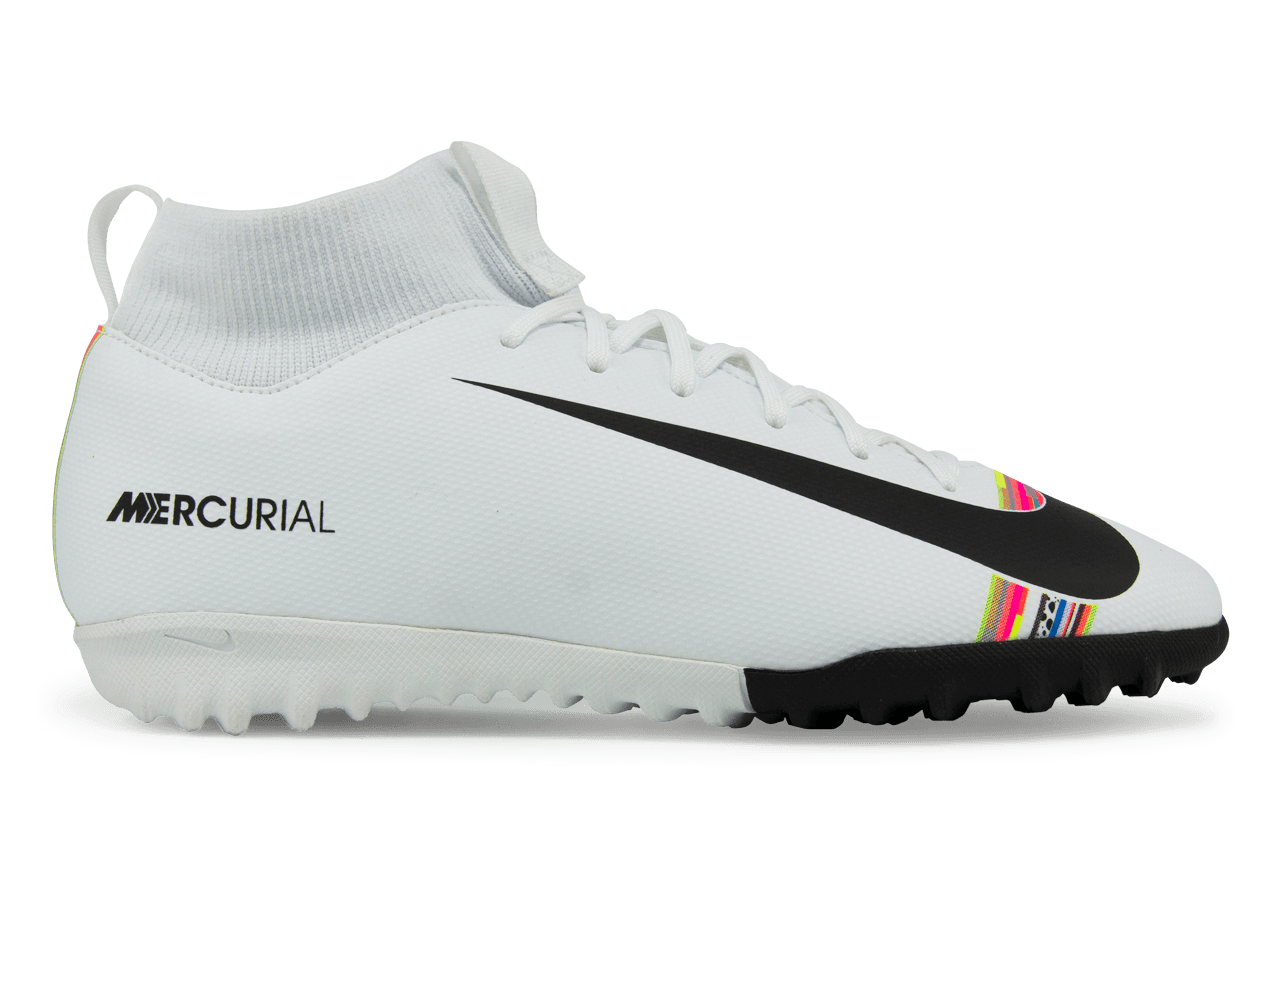 Nike Kids Mercurial Superfly 6 Academy GS Turf Soccer Shoes White/Black/Pure Platinum